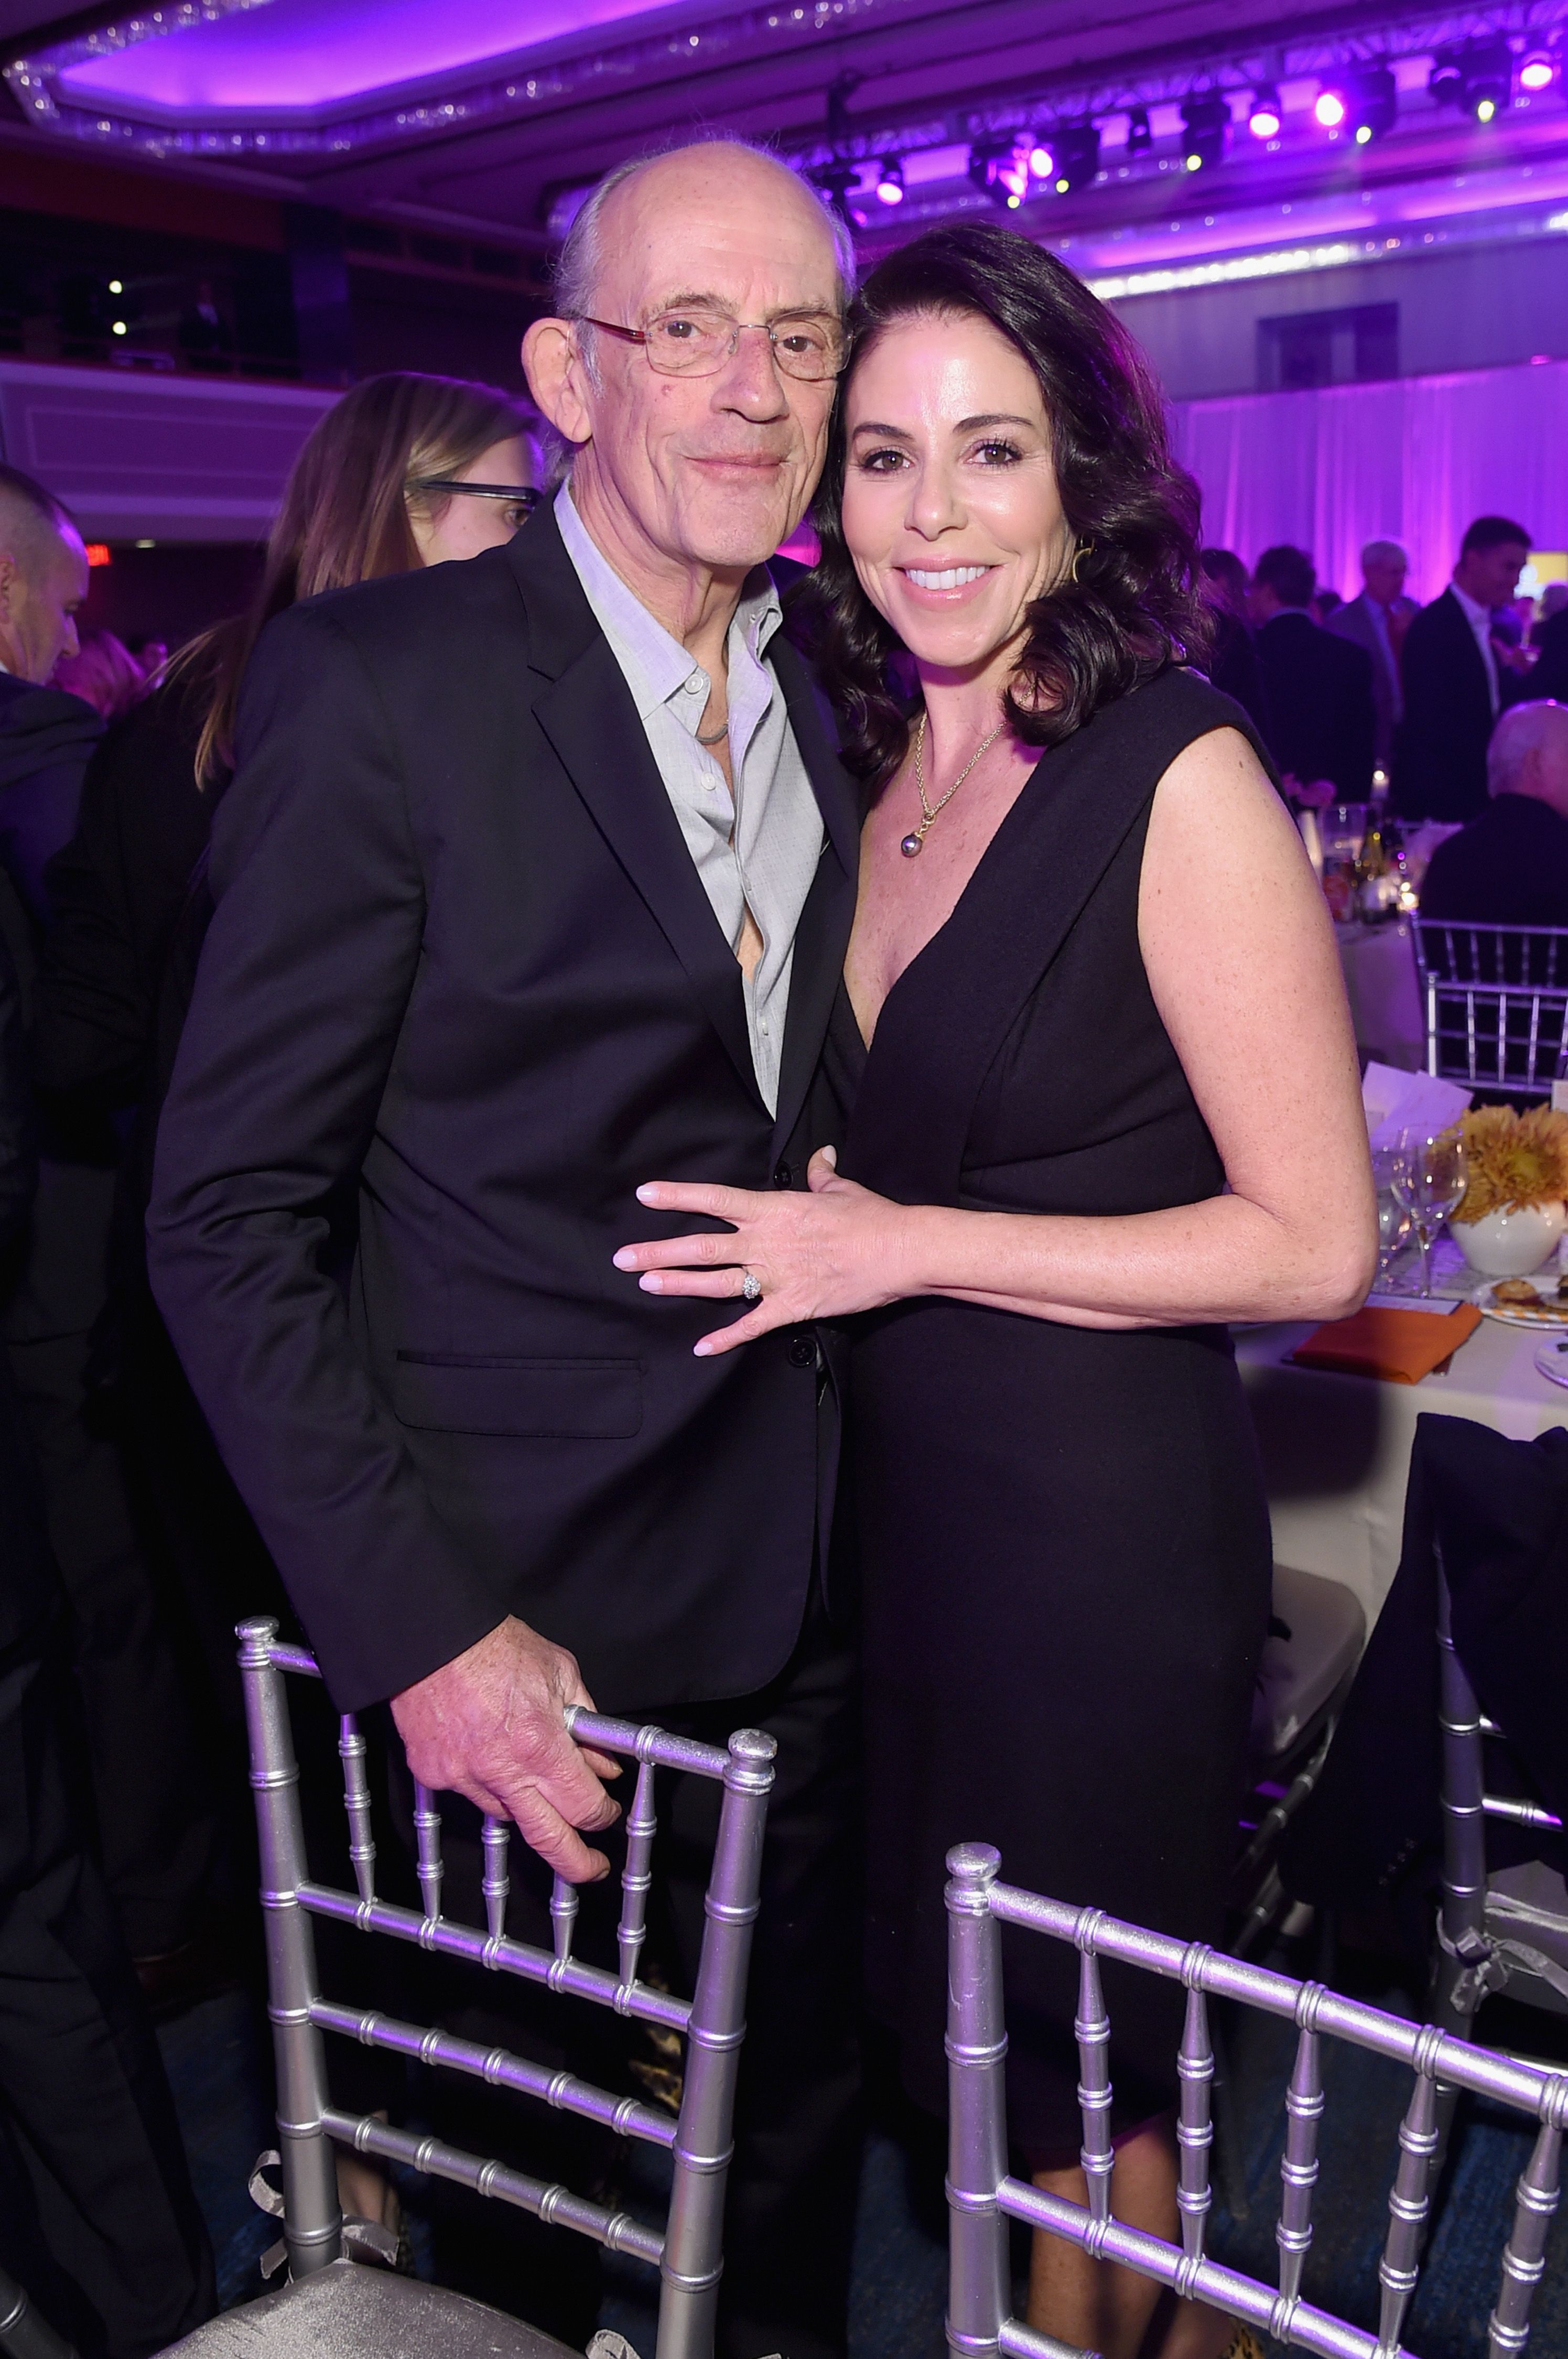  Christopher Lloyd and wife Lisa Lloyd at a benefit for The Michael J. Fox Foundation in 2018 in New York | Source: Getty Images